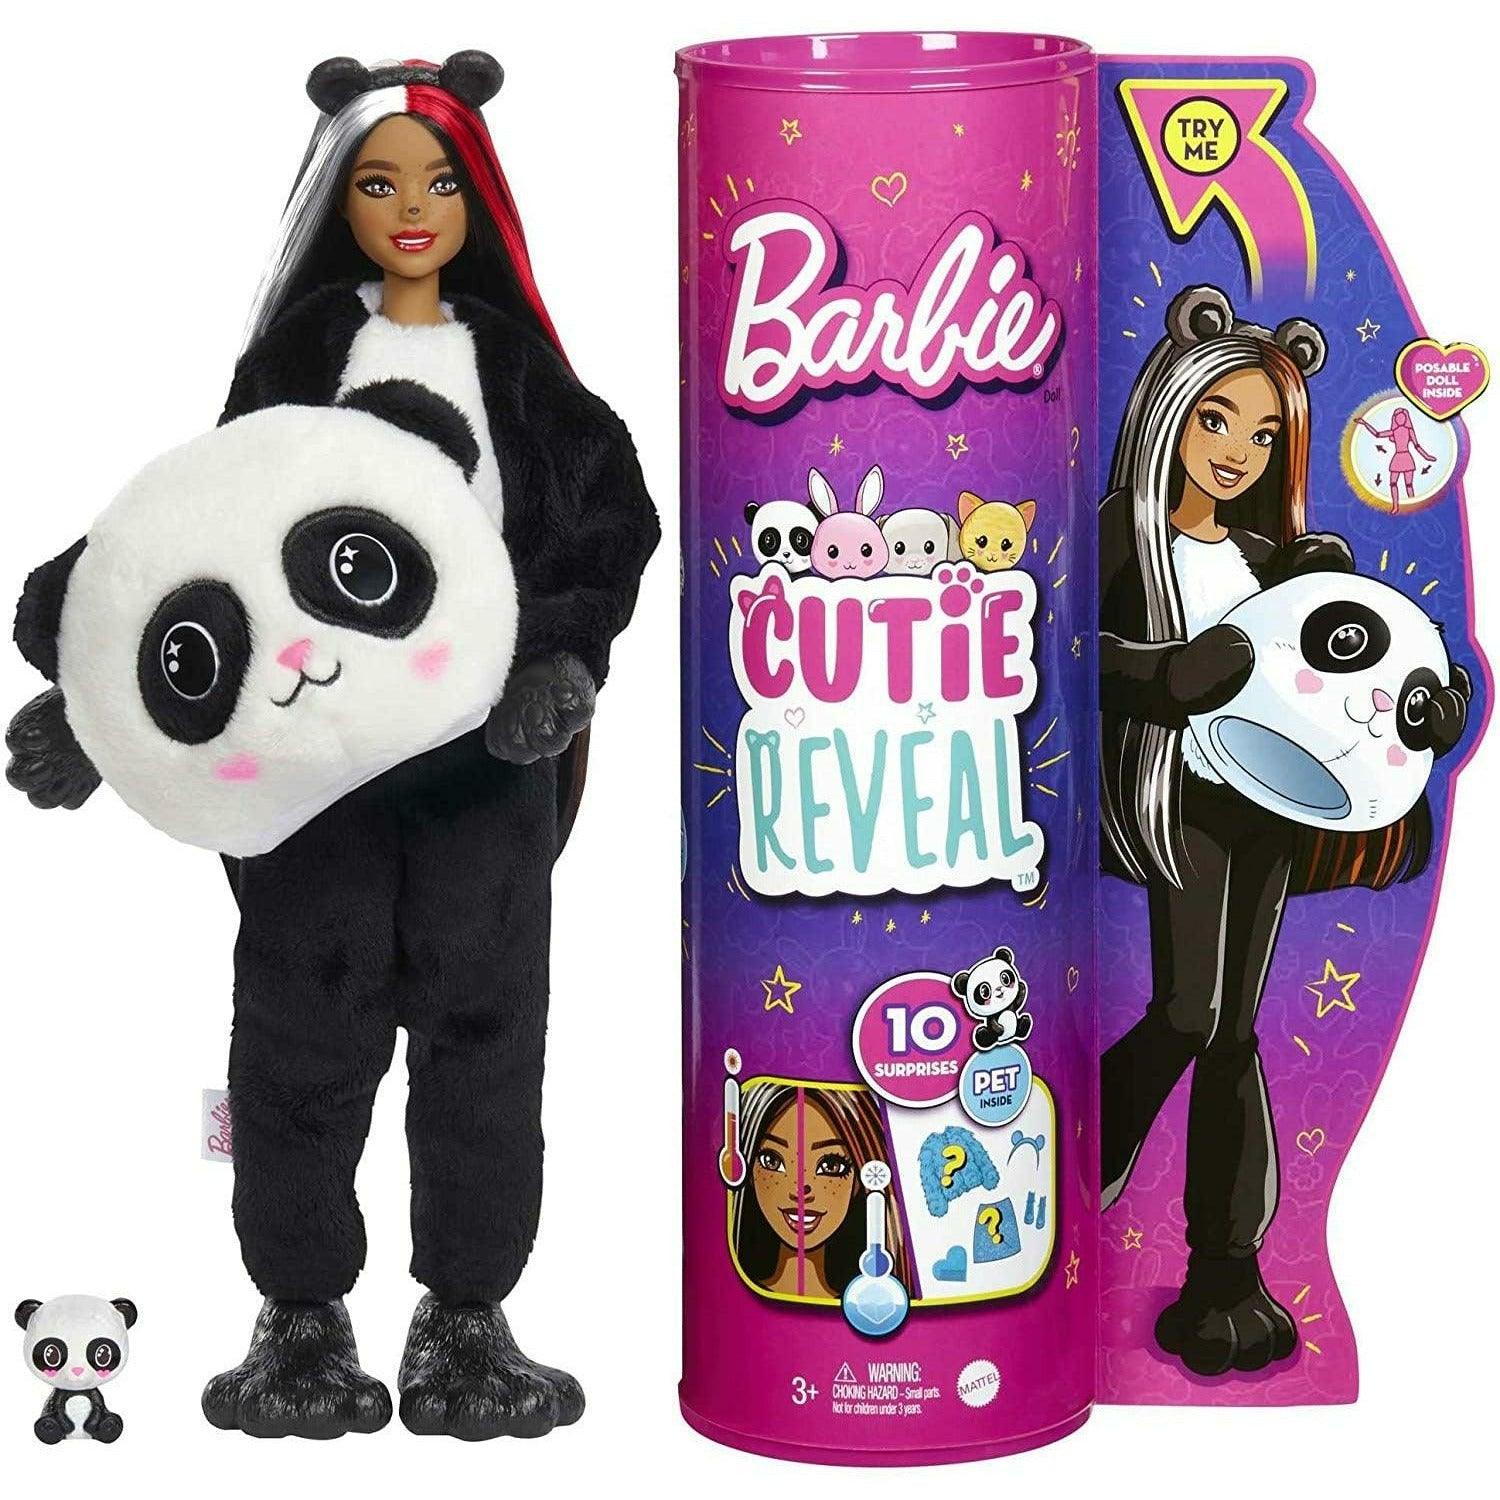 Barbie Cutie Reveal Doll With Panda Plush Costume & 10 Surprises Including Mini Pet & Color Change - BumbleToys - 5-7 Years, Barbie, Fashion Dolls & Accessories, Girls, OXE, Pre-Order